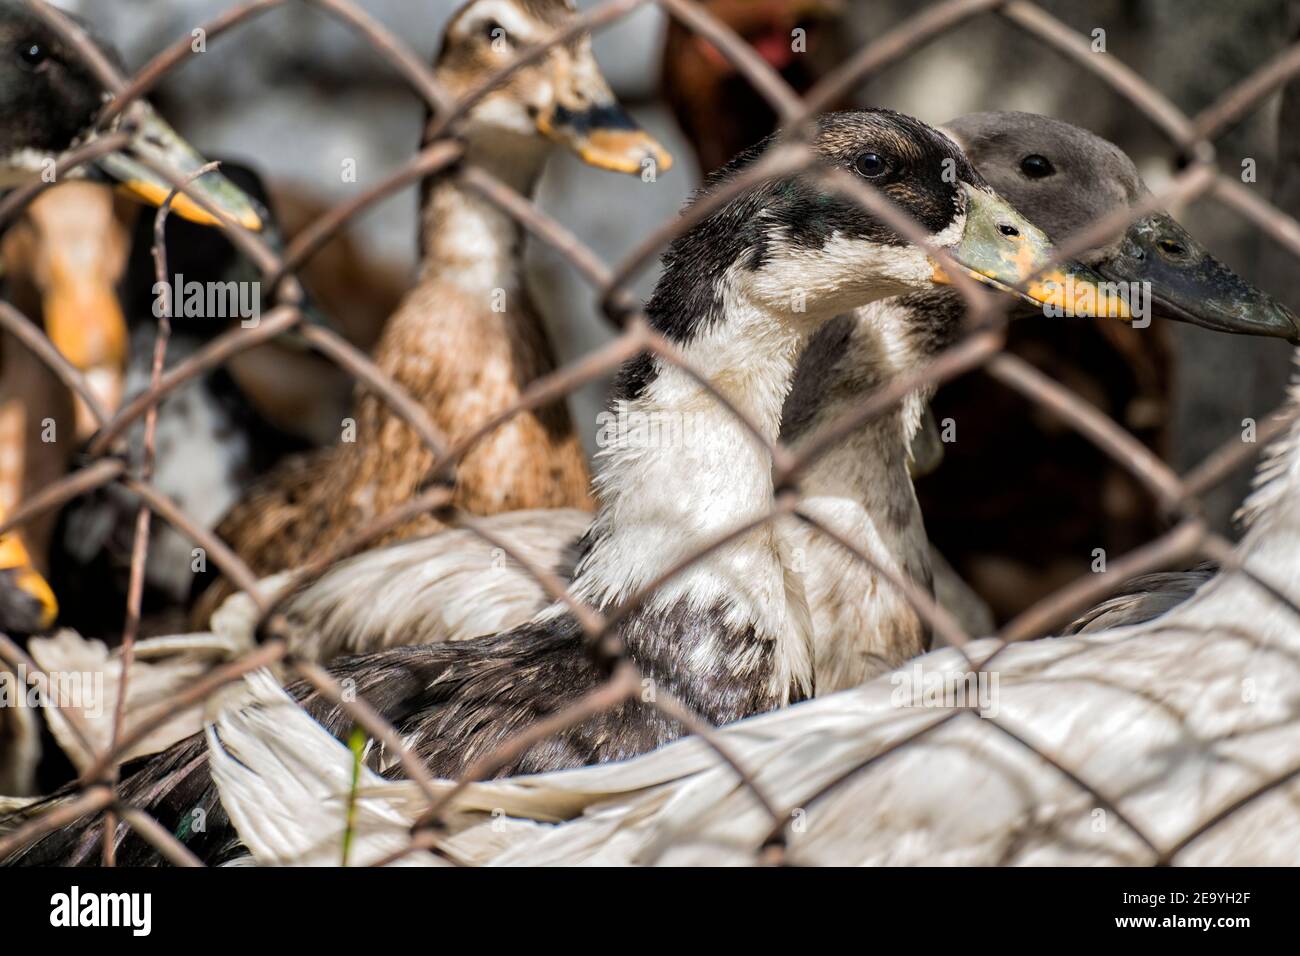 Domestic duck peeks out from behind a wire mesh fencing Stock Photo